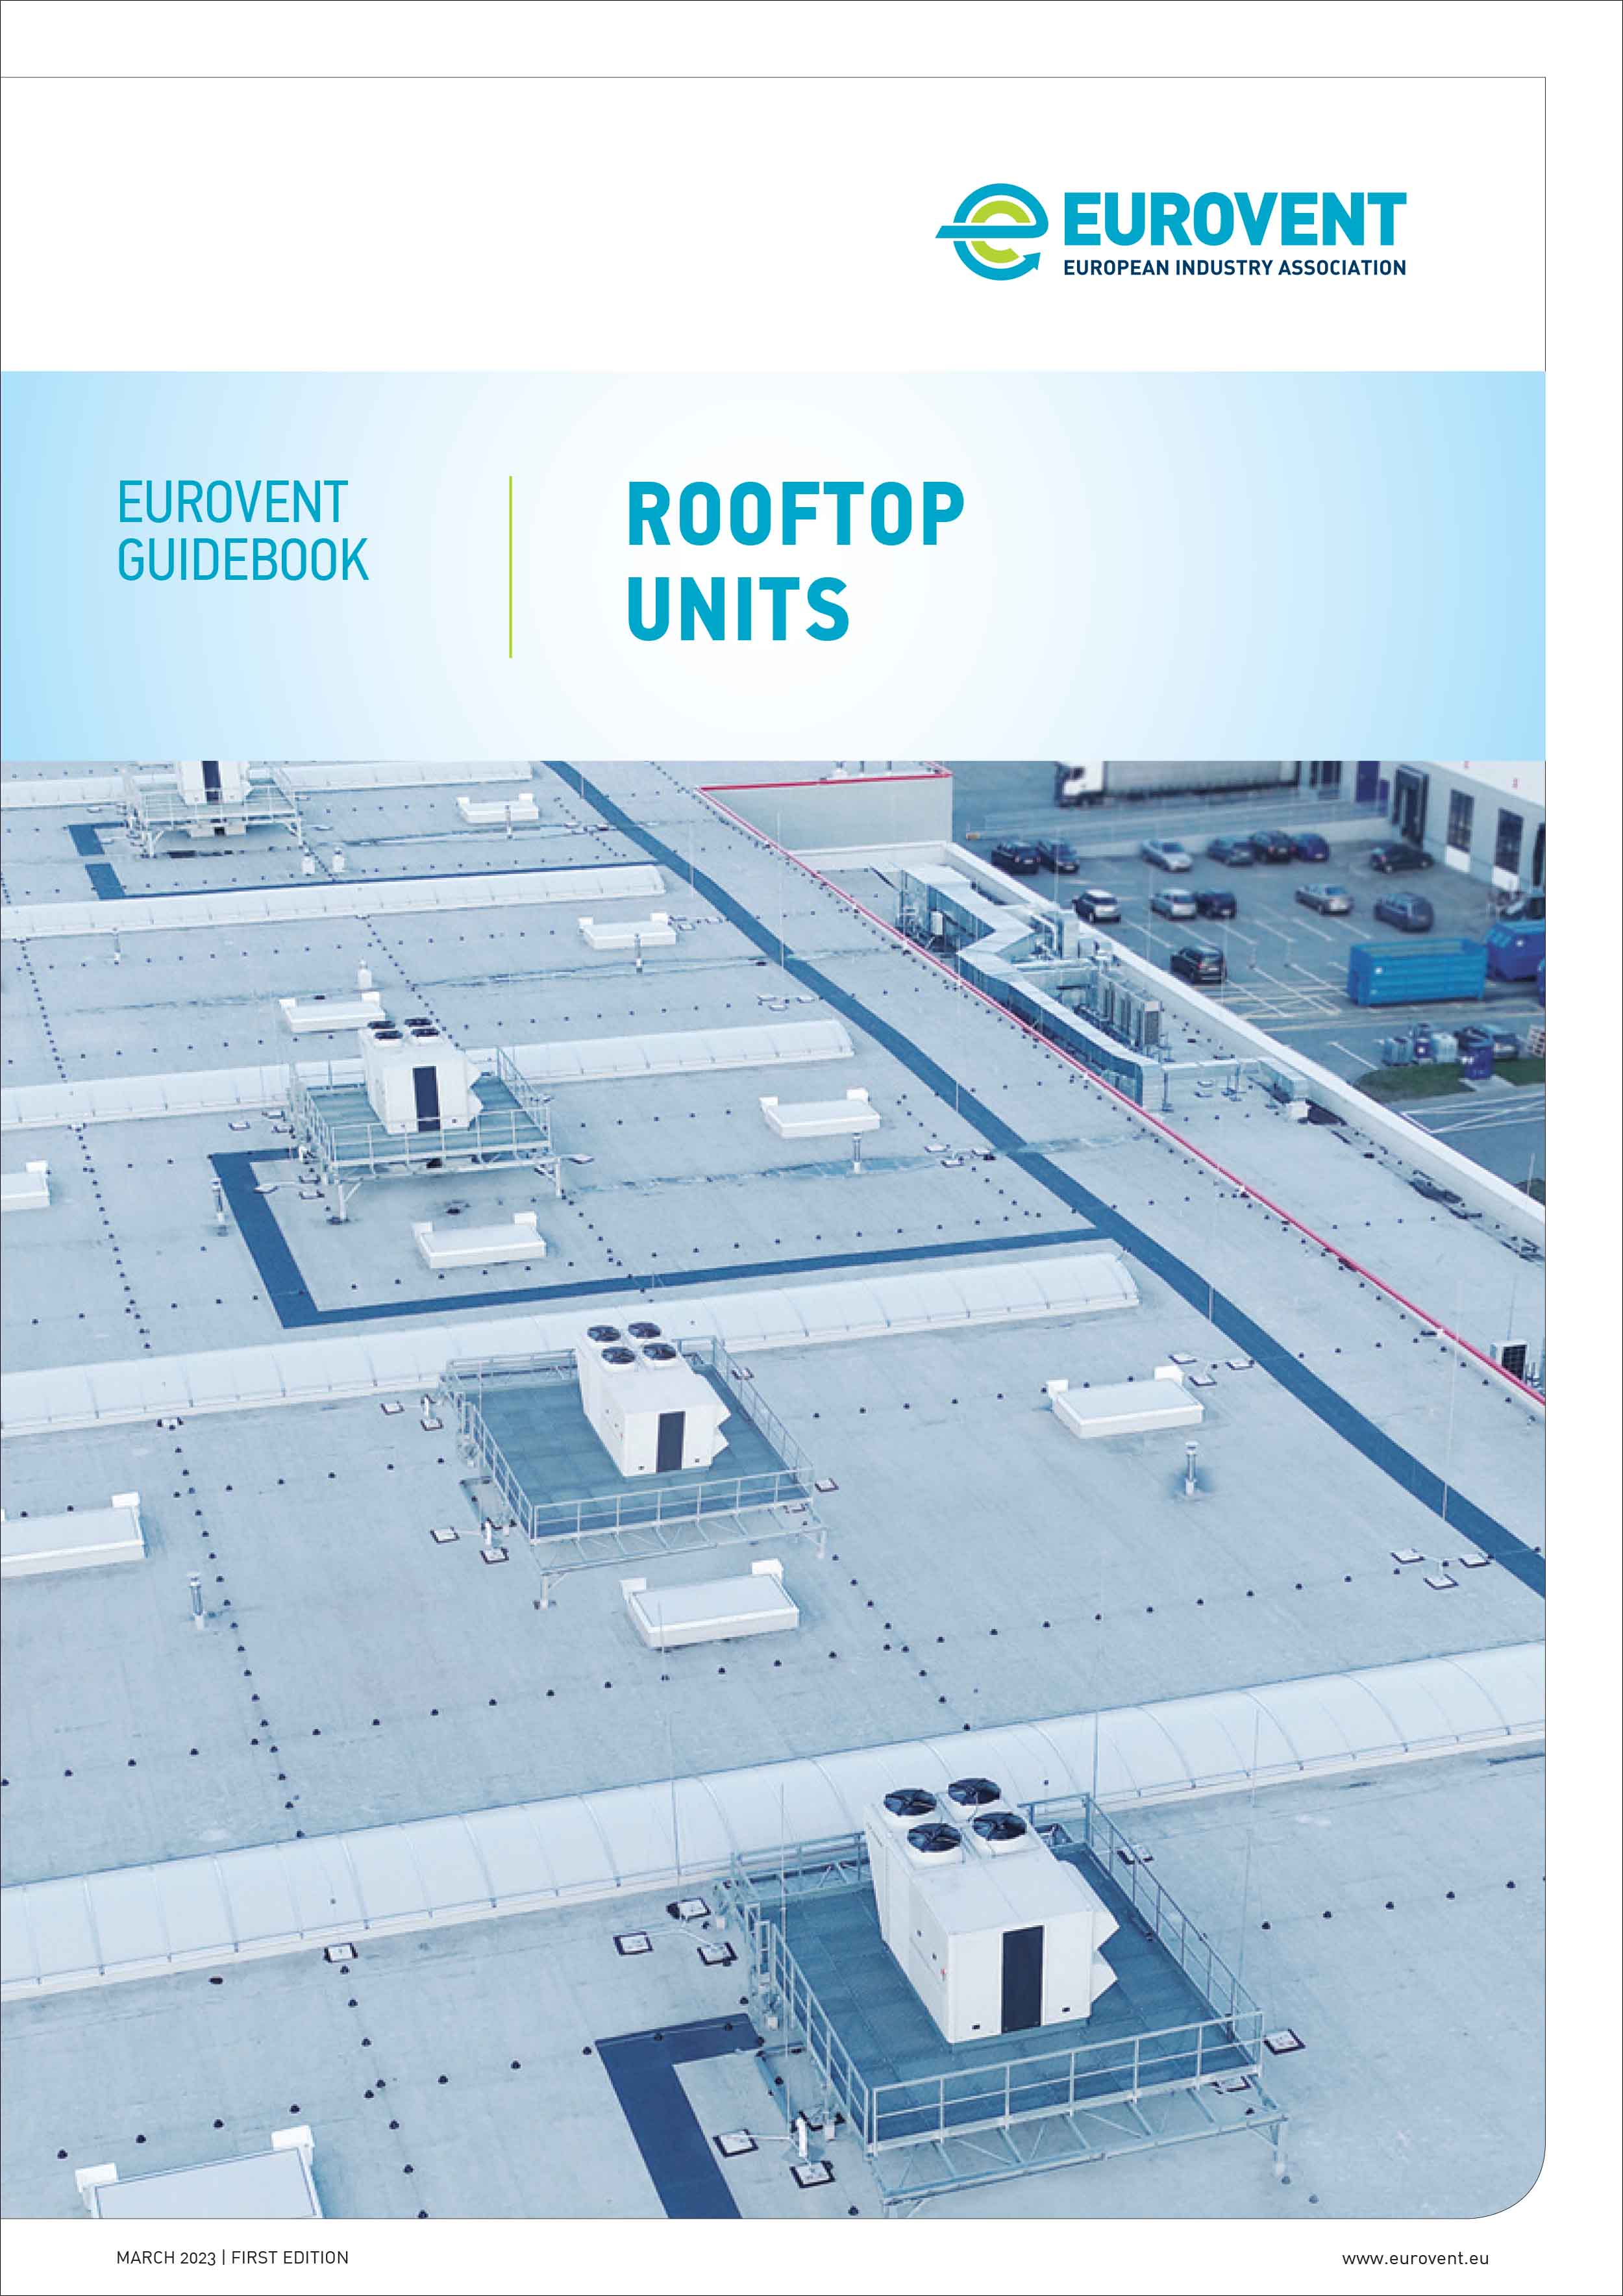 This Guidebook version is in English. If you are interested in the print version of this document, contact the Eurovent Secretariat (secretariat@eurovent.eu).